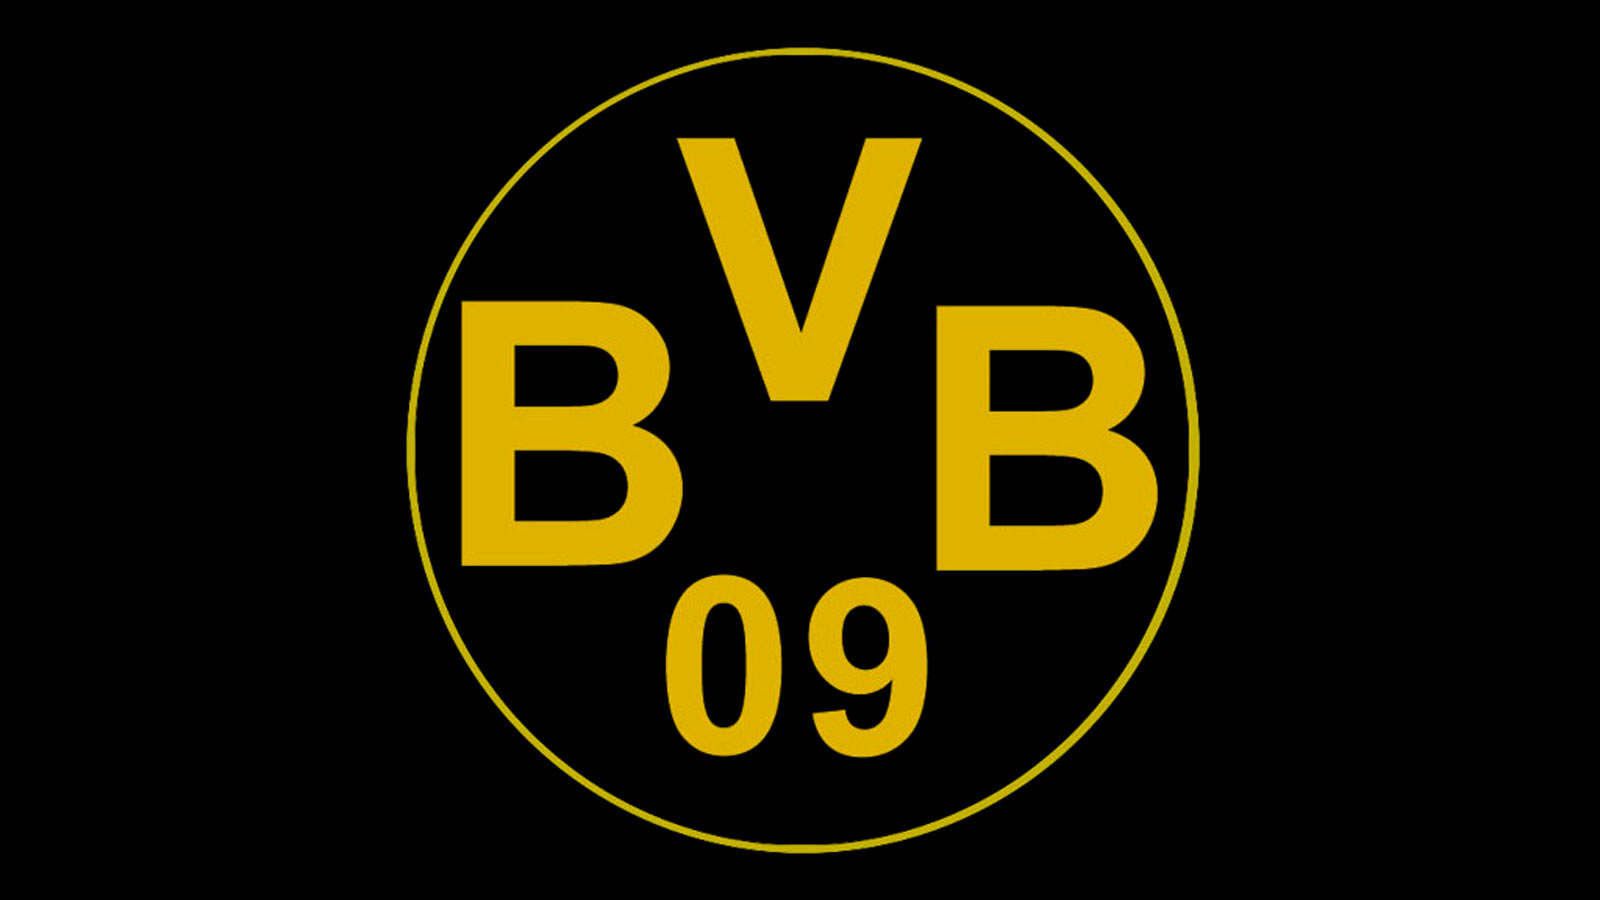 Full Bvb Logo History Here Is Why Borussia Dortmund S Logo Featured A Lion For Two Years Footy Headlines